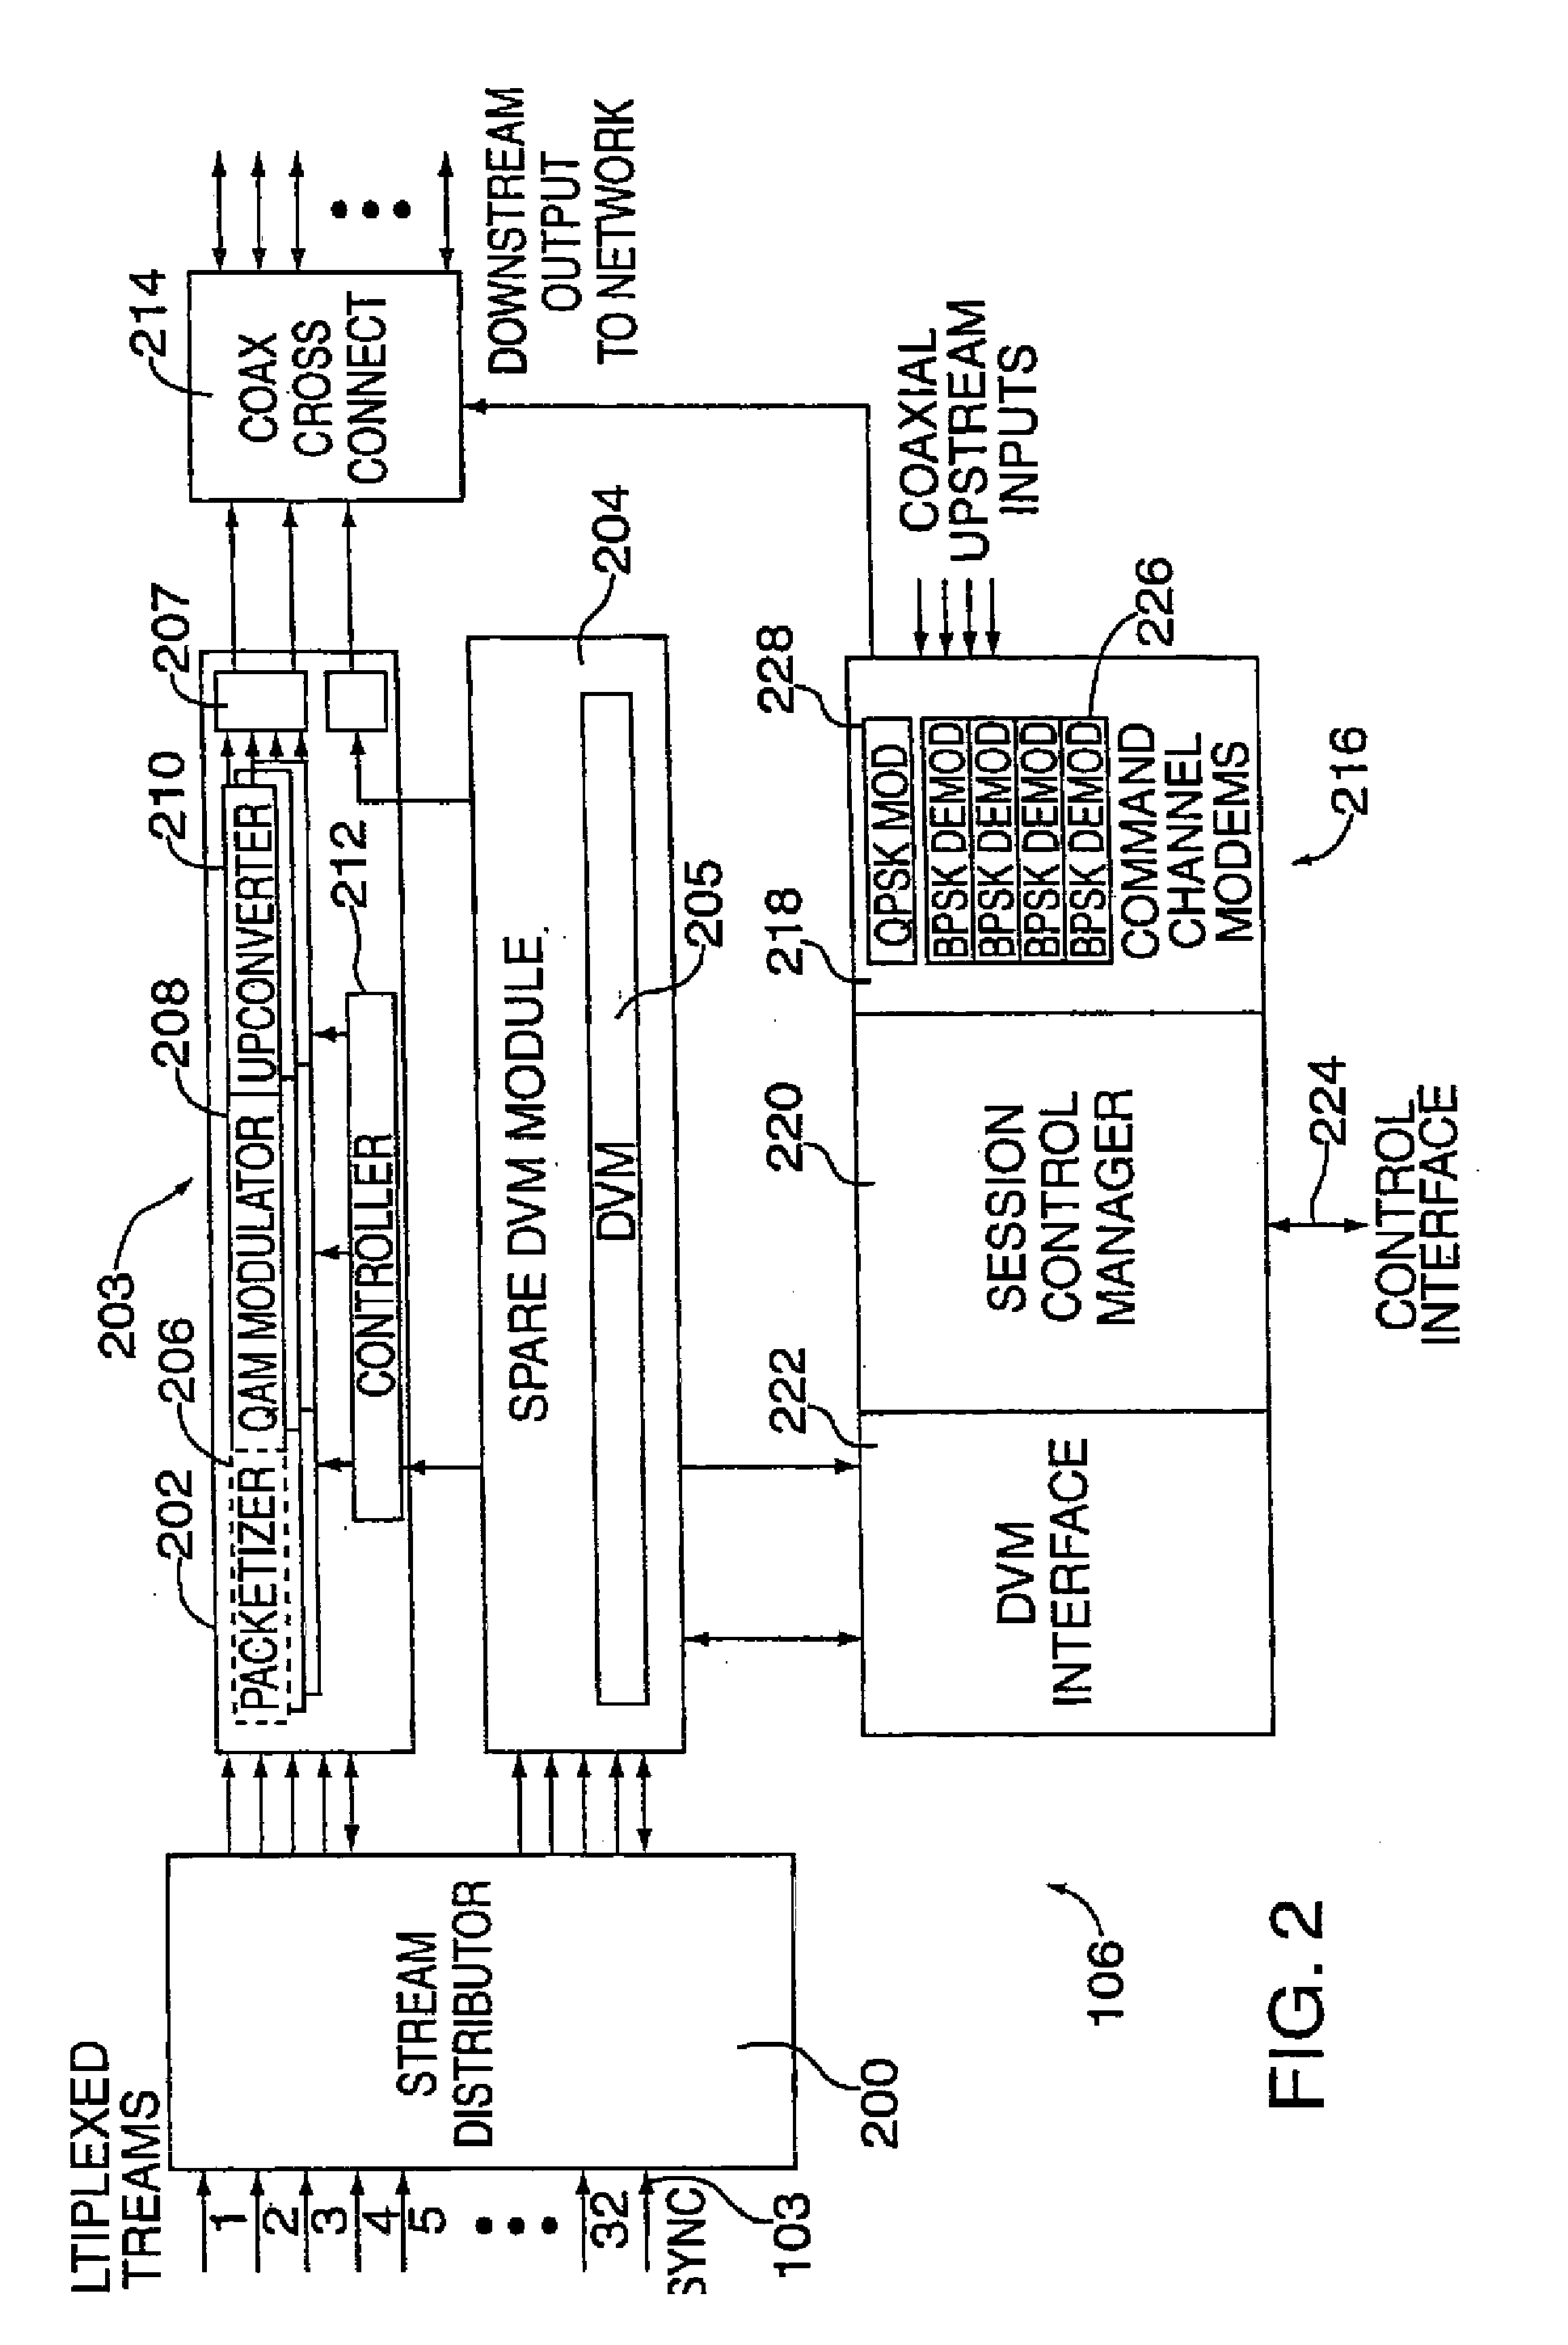 System for Interactively Distributing Information Services